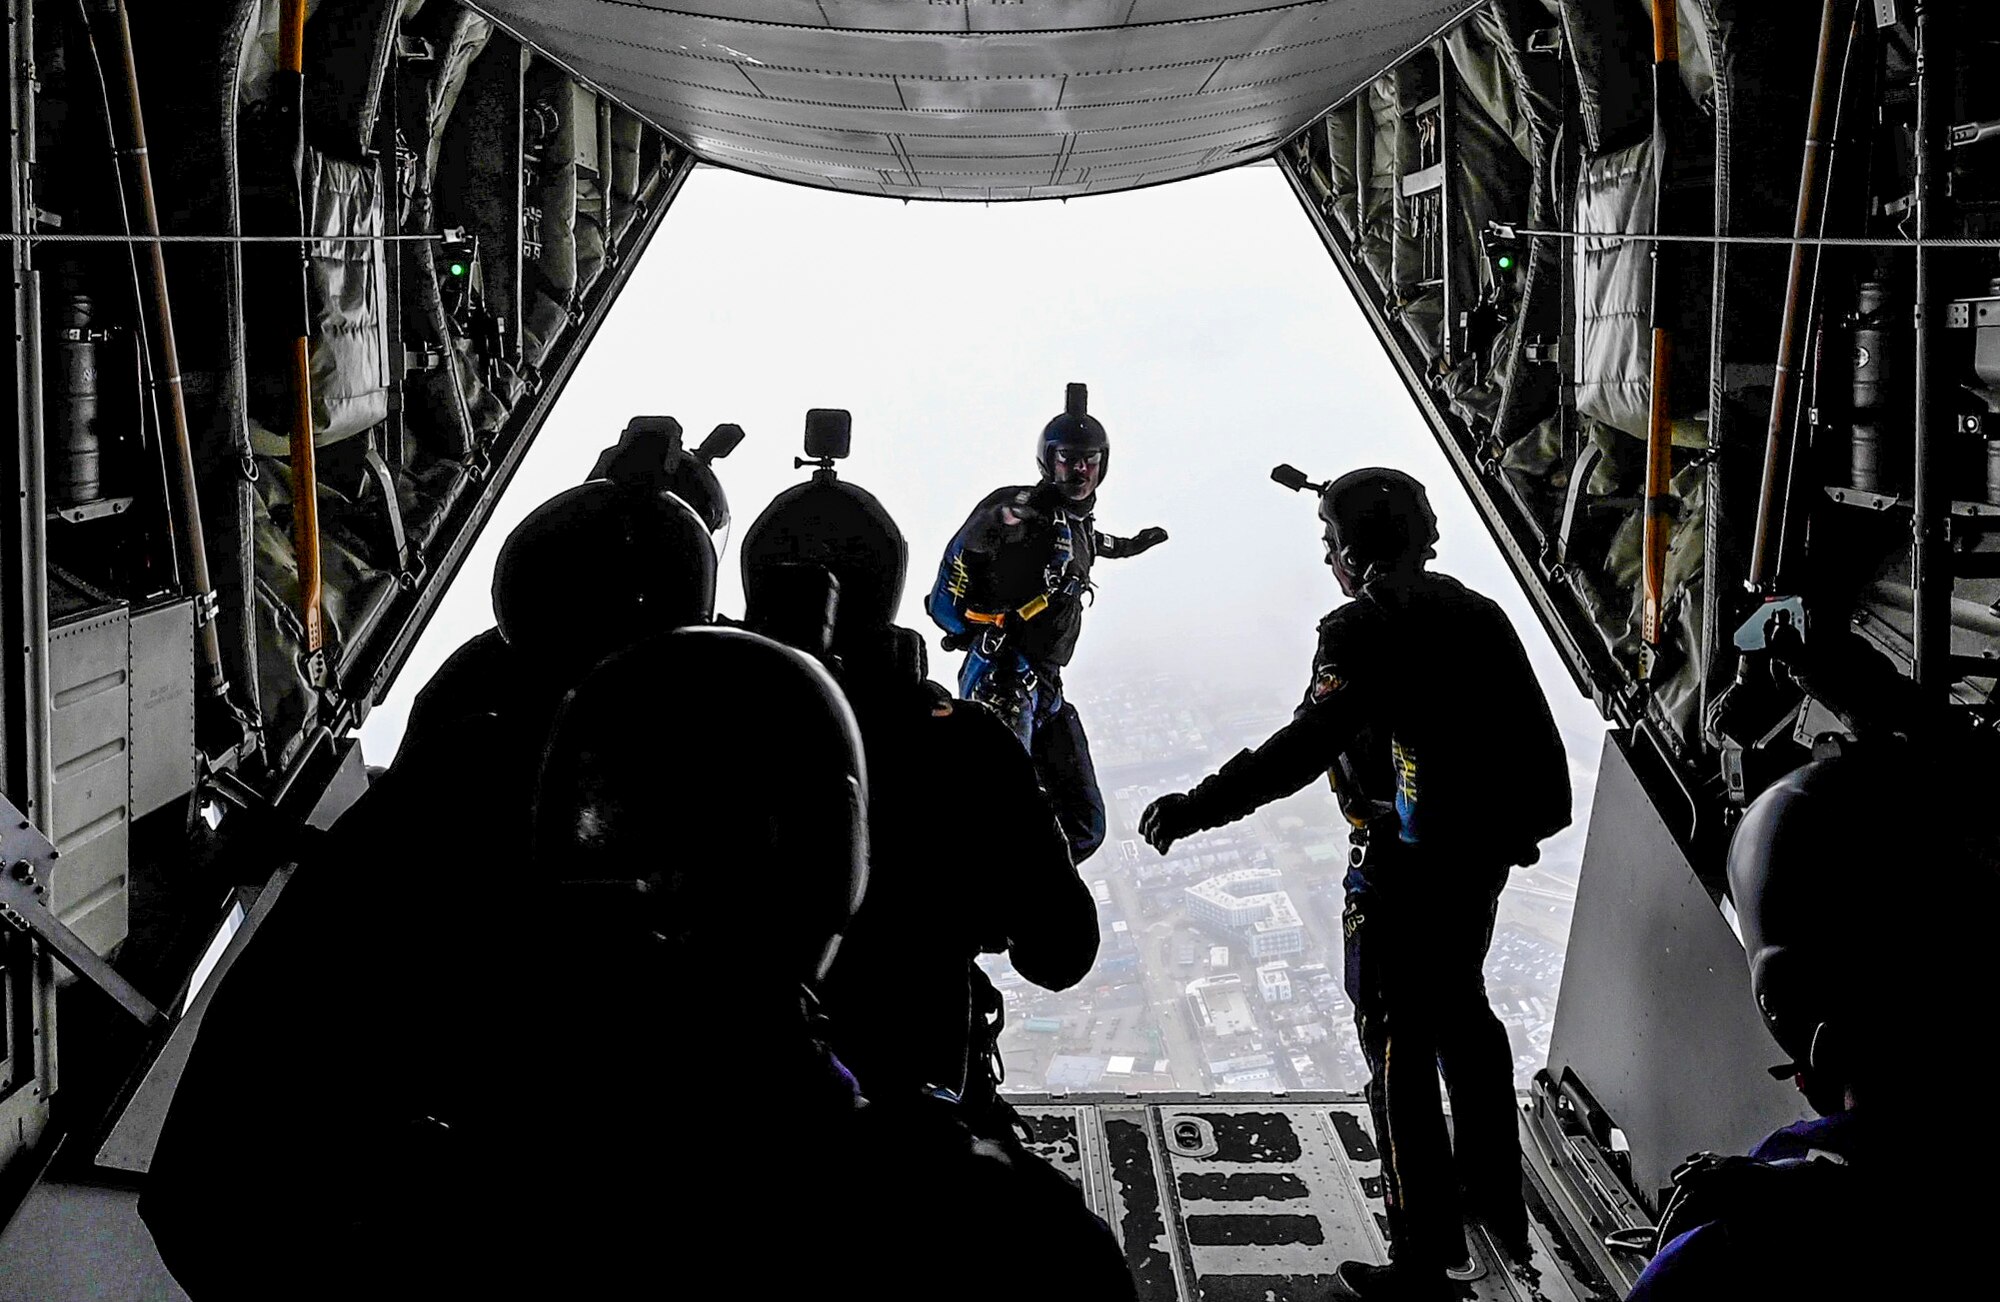 Men jump out of a plane.